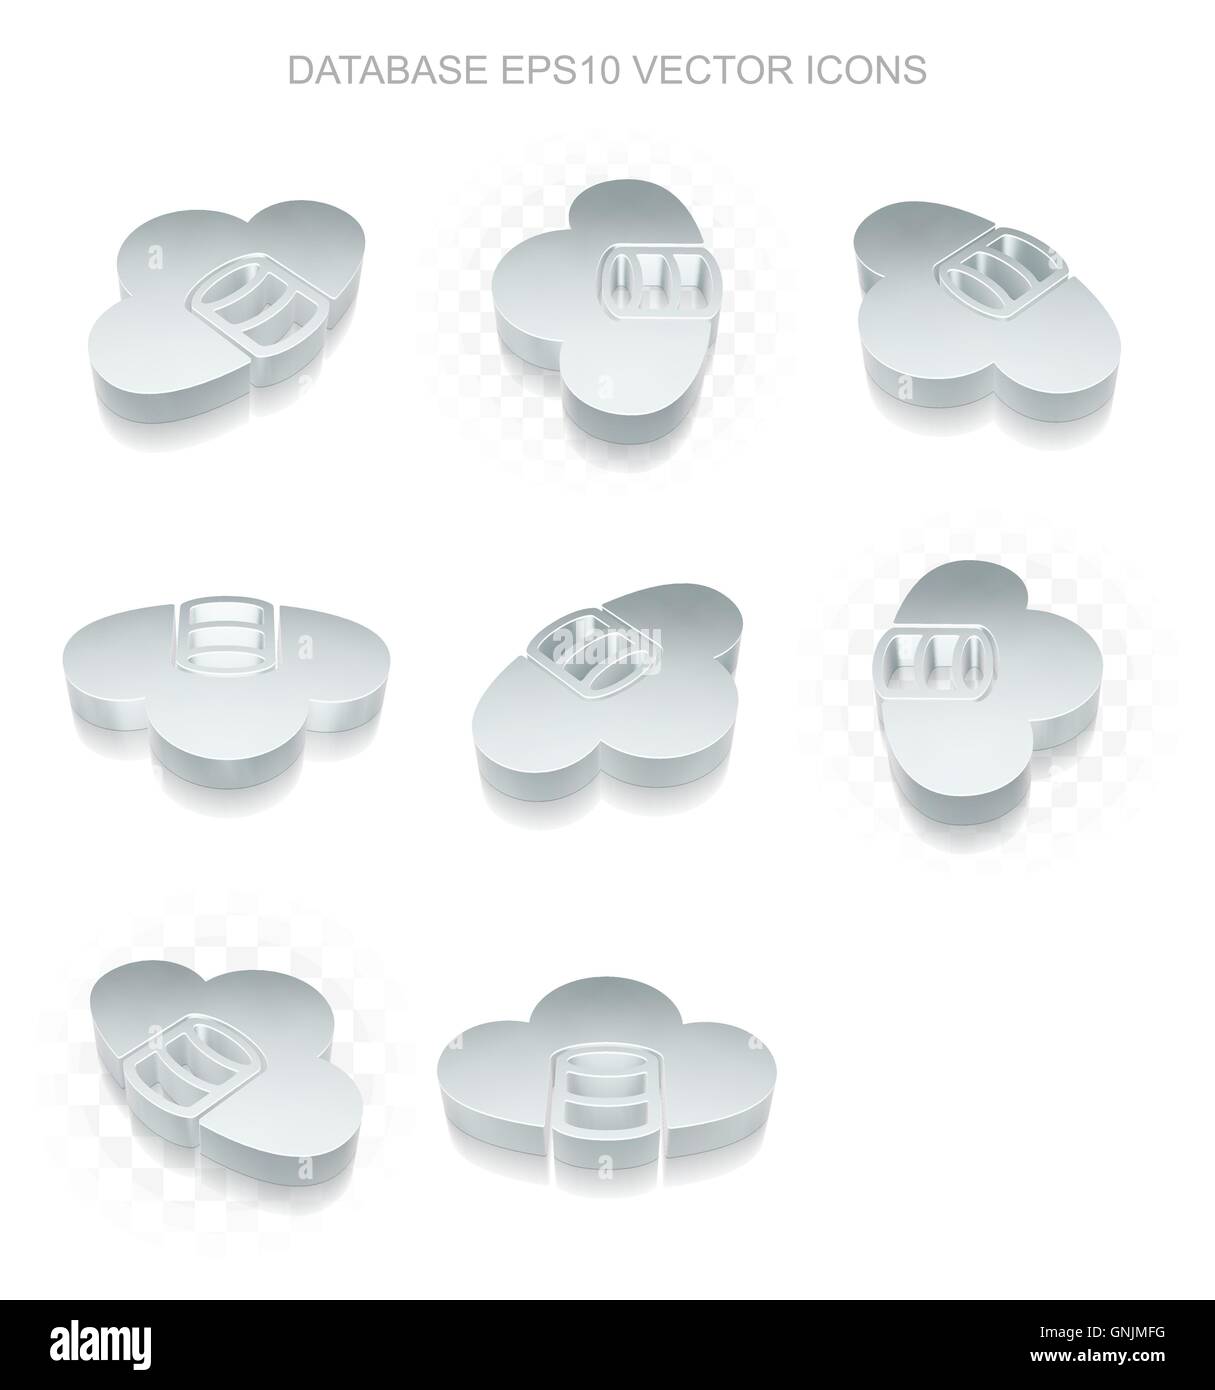 Programming icons set: different views of metallic Database With Cloud, transparent shadow, EPS 10 vector. Stock Vector